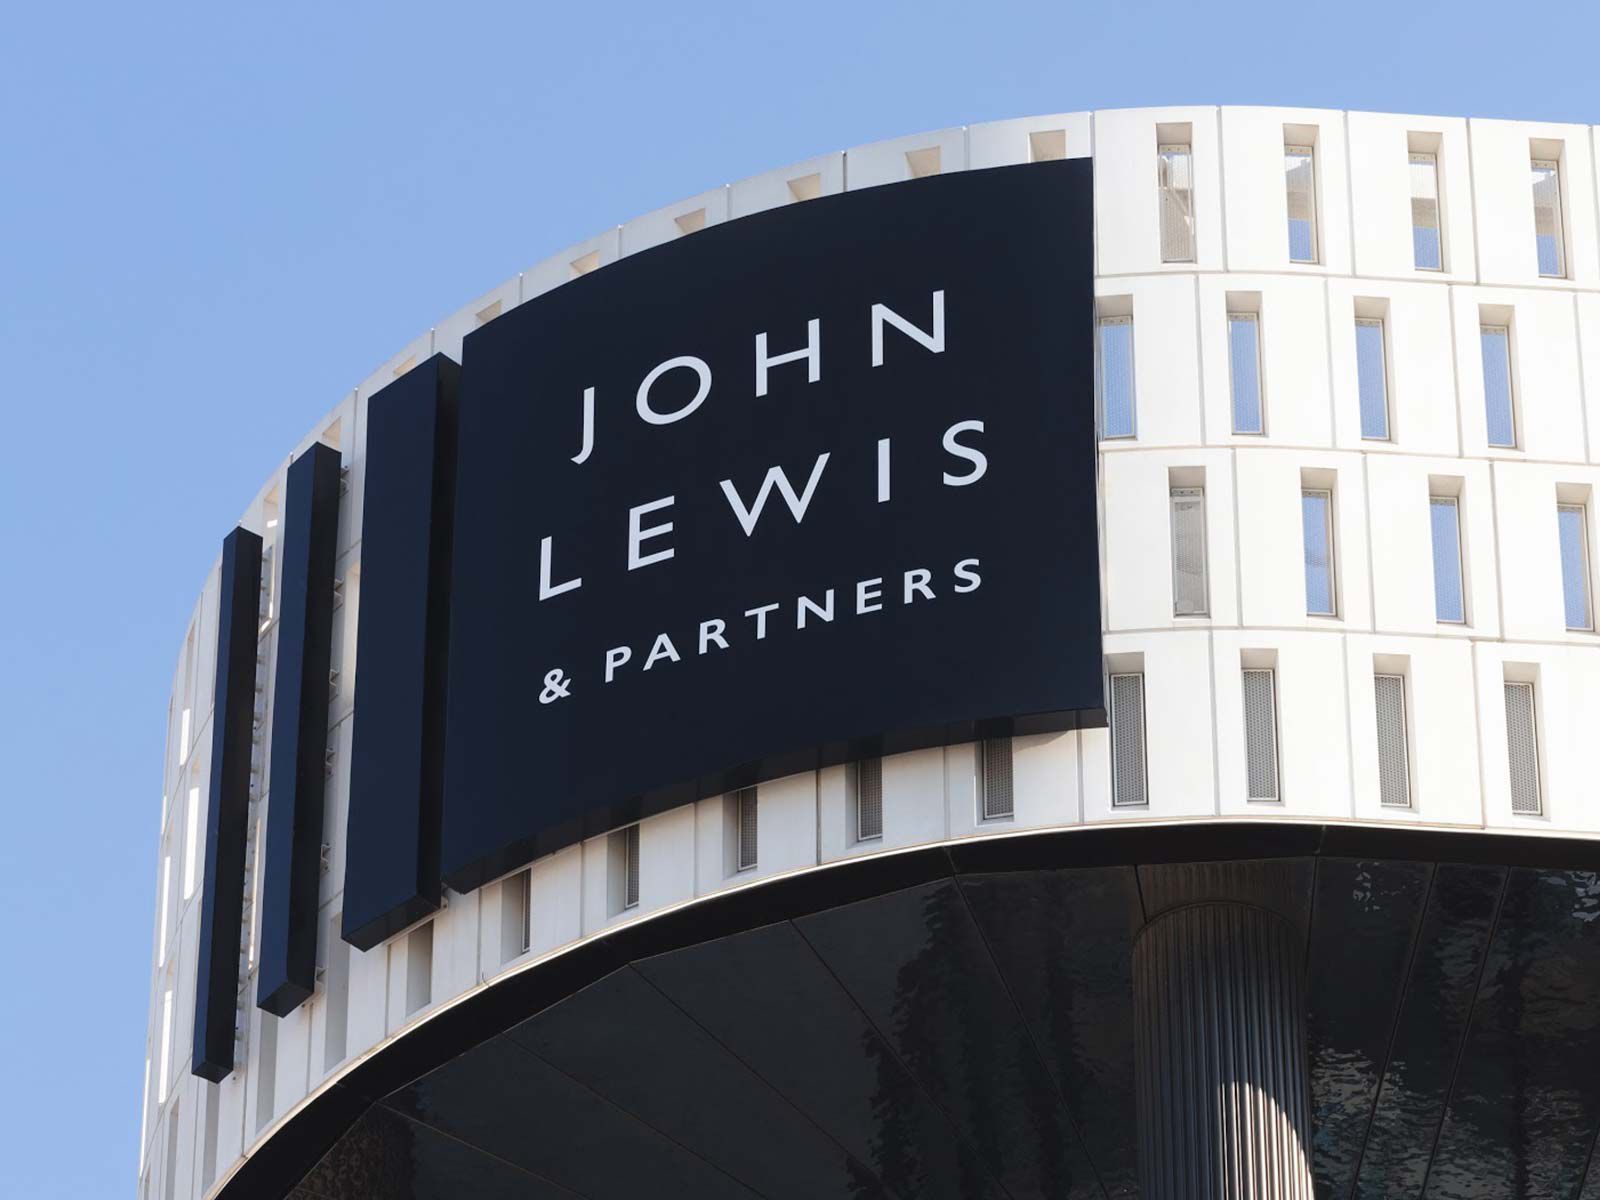 an image of a John Lewis & Partners store front